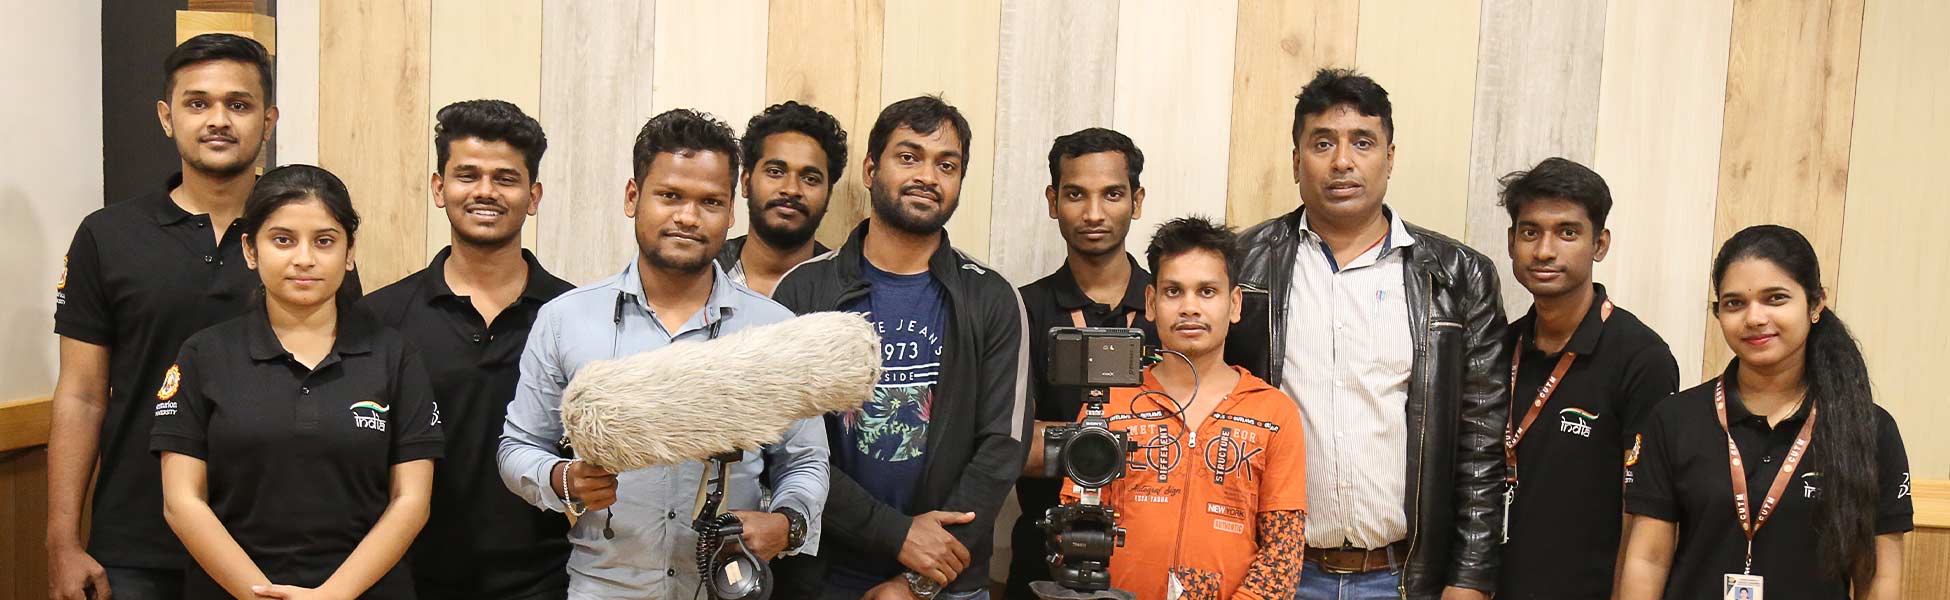 web series shooting locations in india, web series shooting locations in bihar, web series shooting locations in begusarai